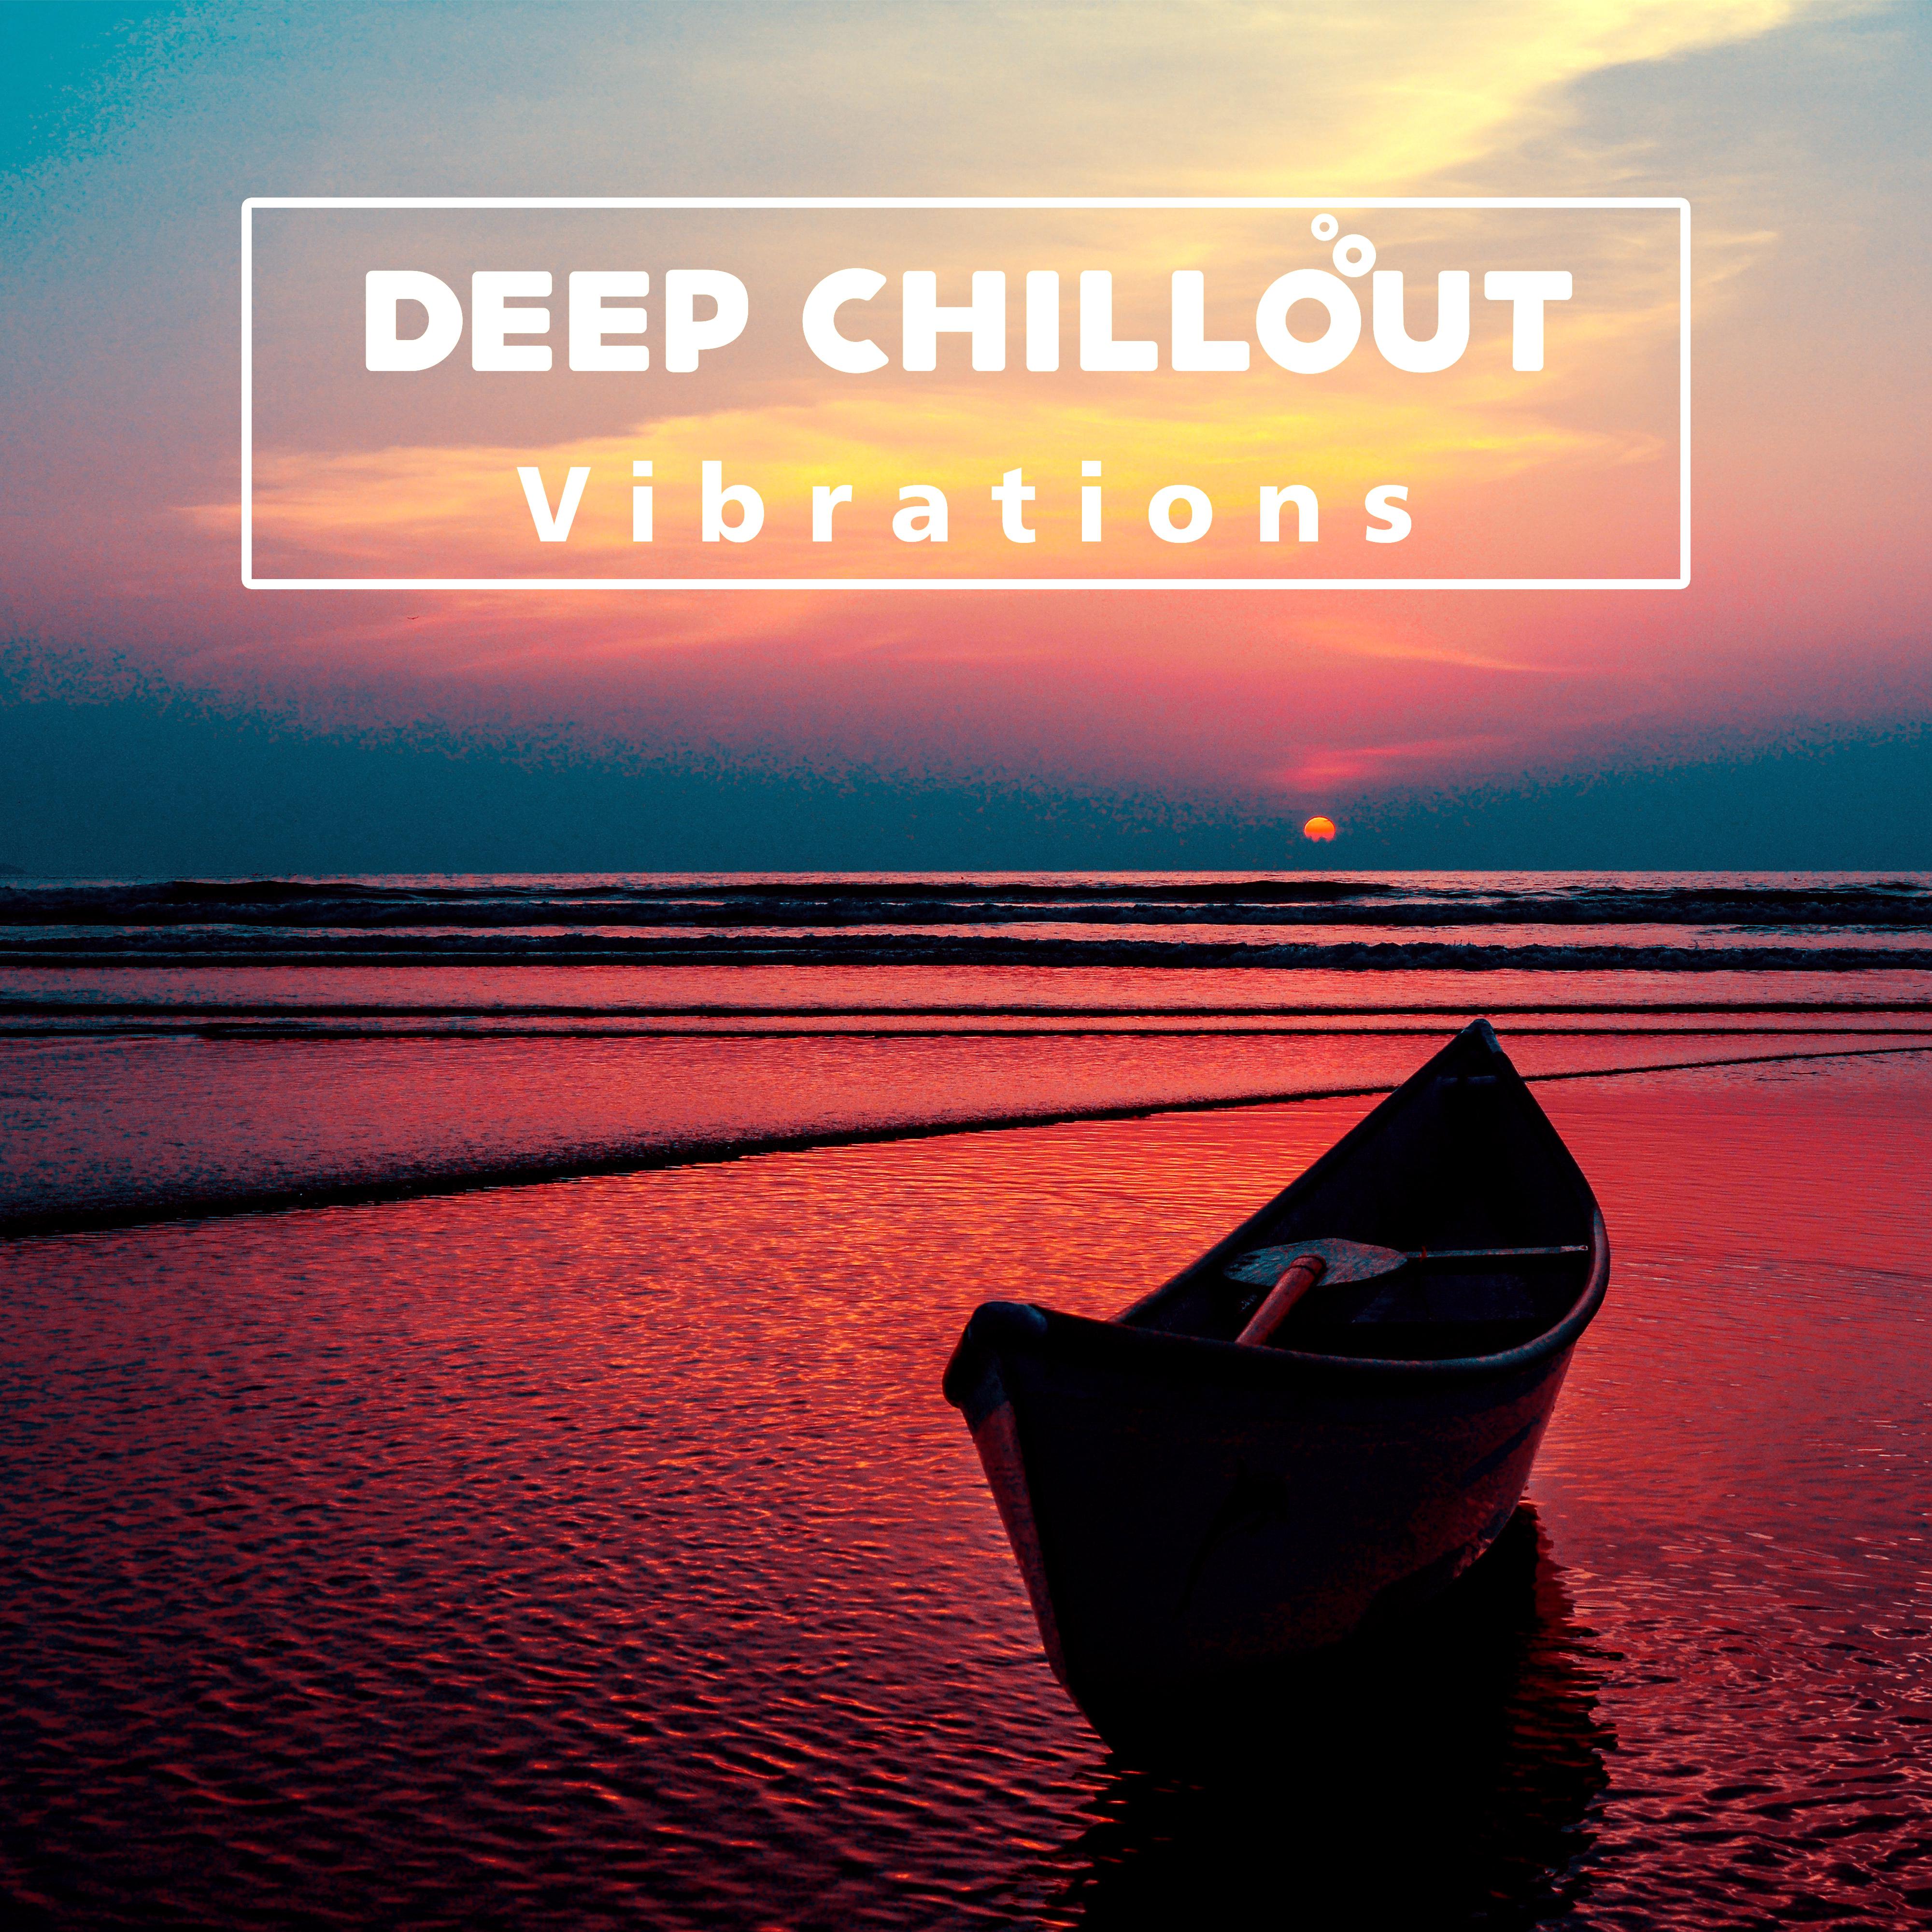 Deep Chillout Vibrations – Electronic Music, Ambient Lounge, Downbeat, Summer Vibes 2017